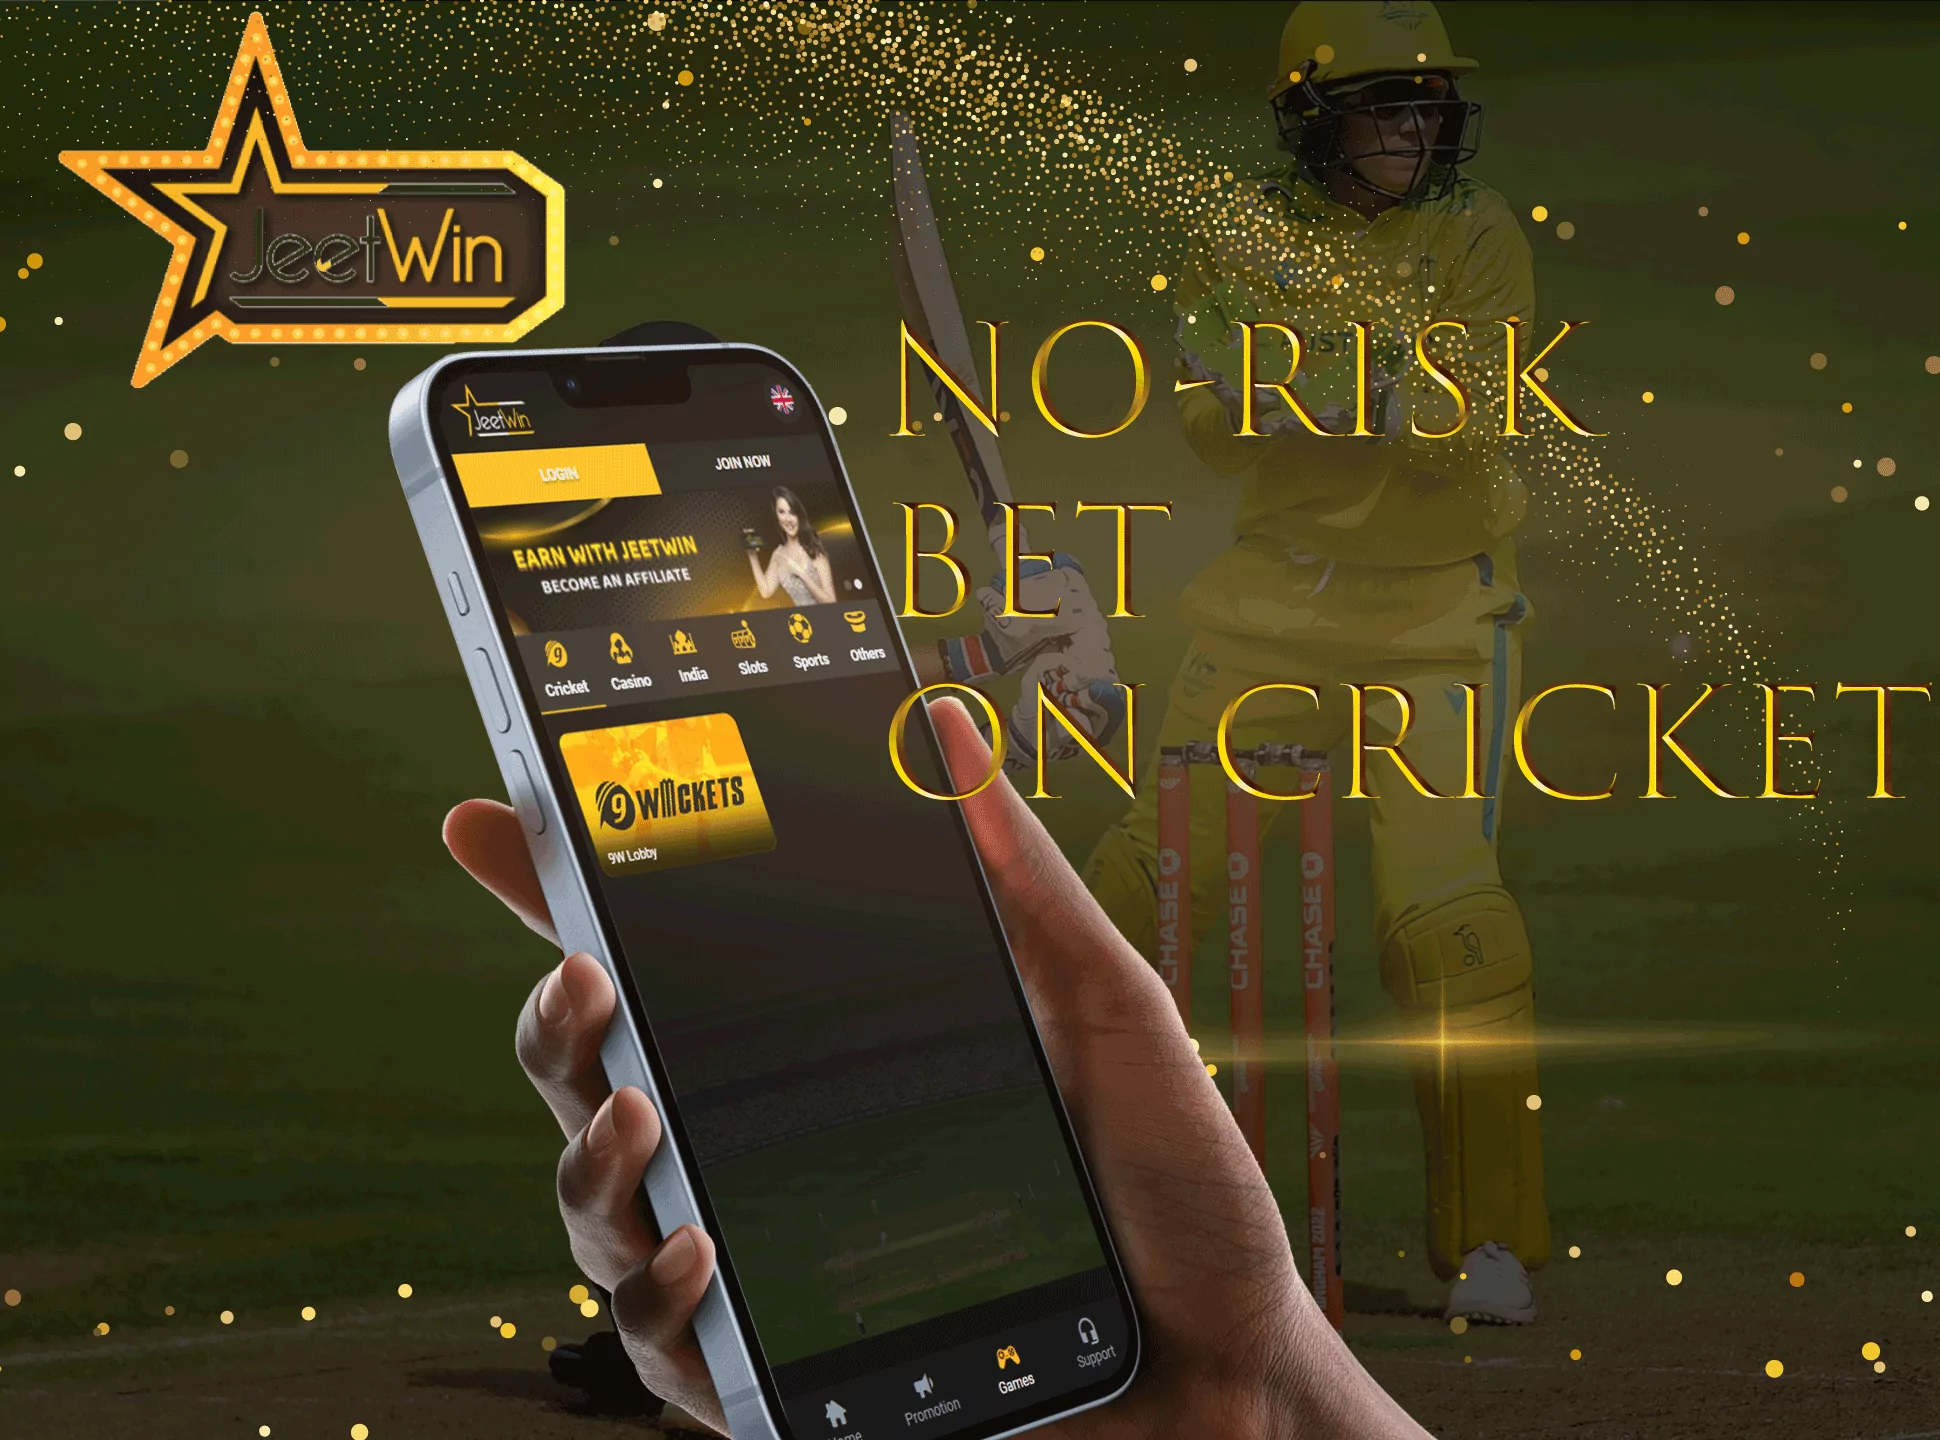 Place no-risk bets to lose less and safe your money.